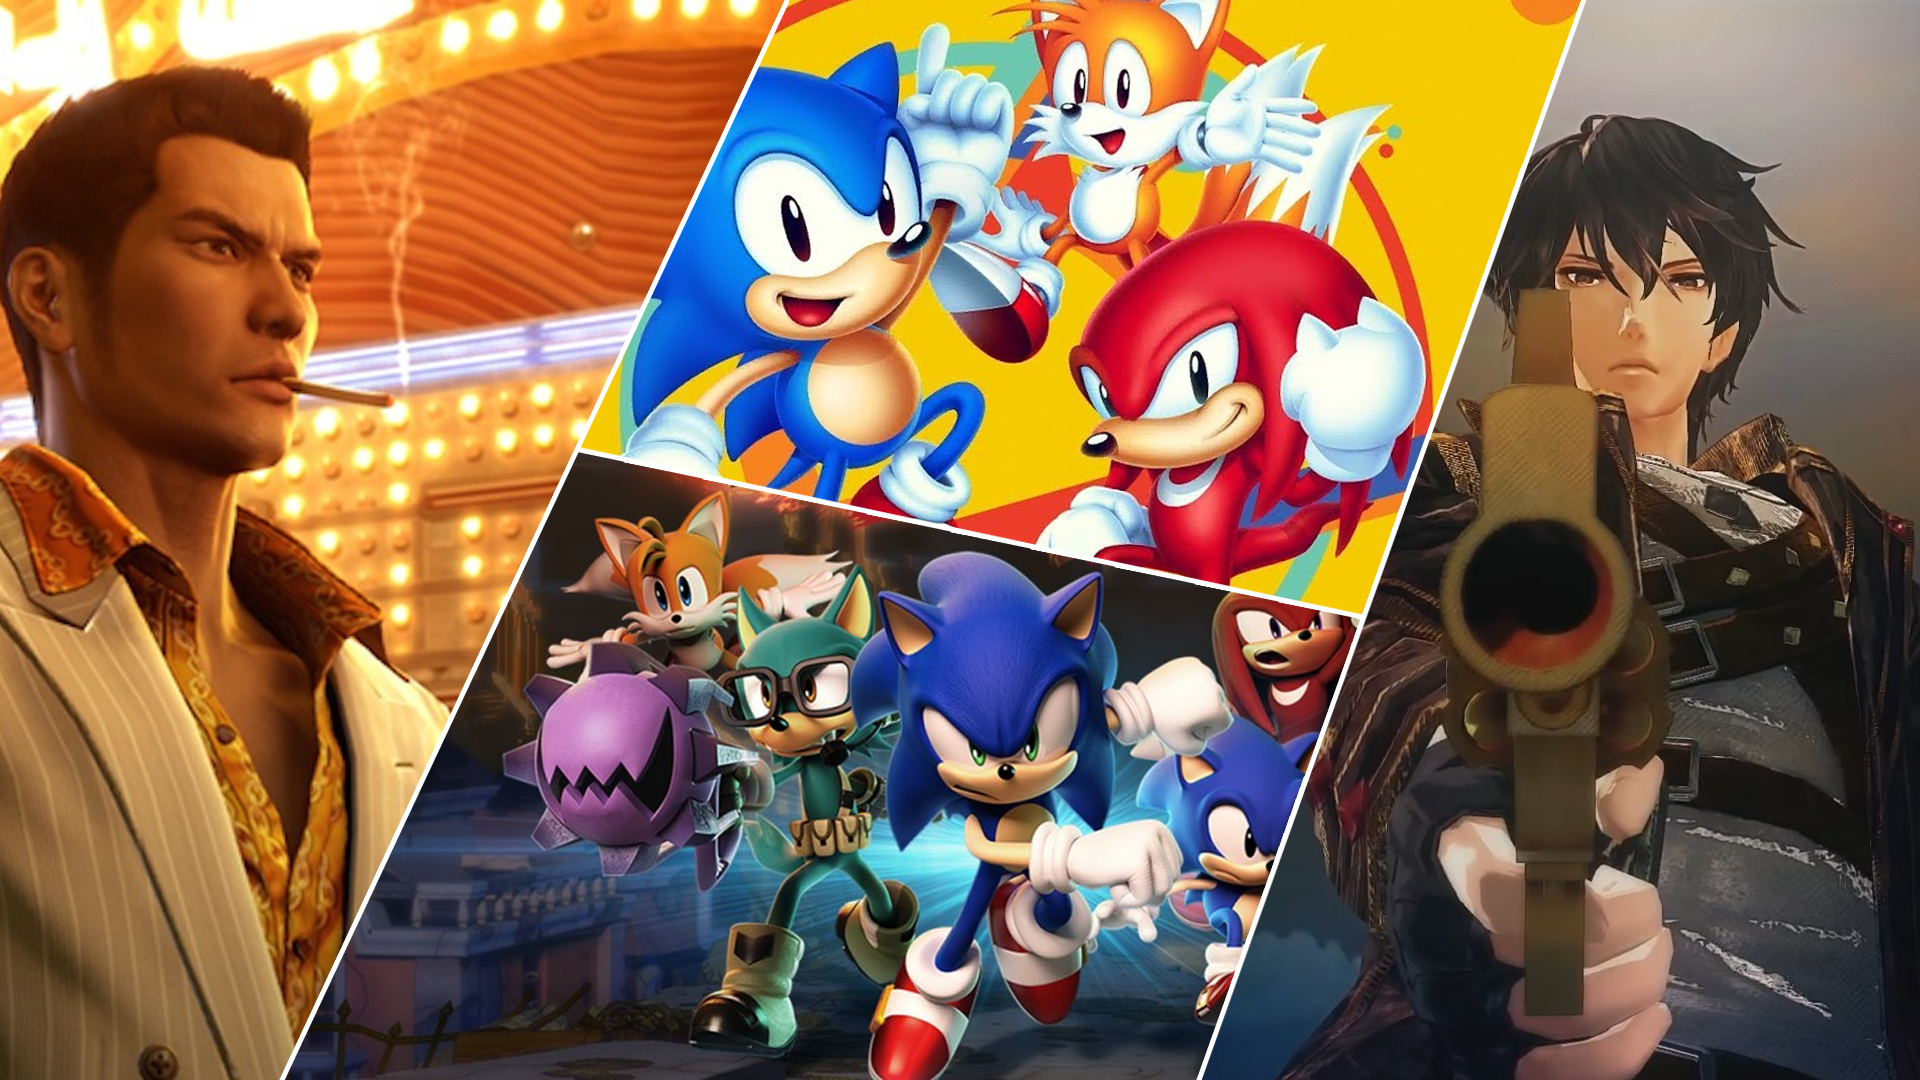 Metacritic Ranks SEGA as the Best Publisher of 2020, Sony in Top 5